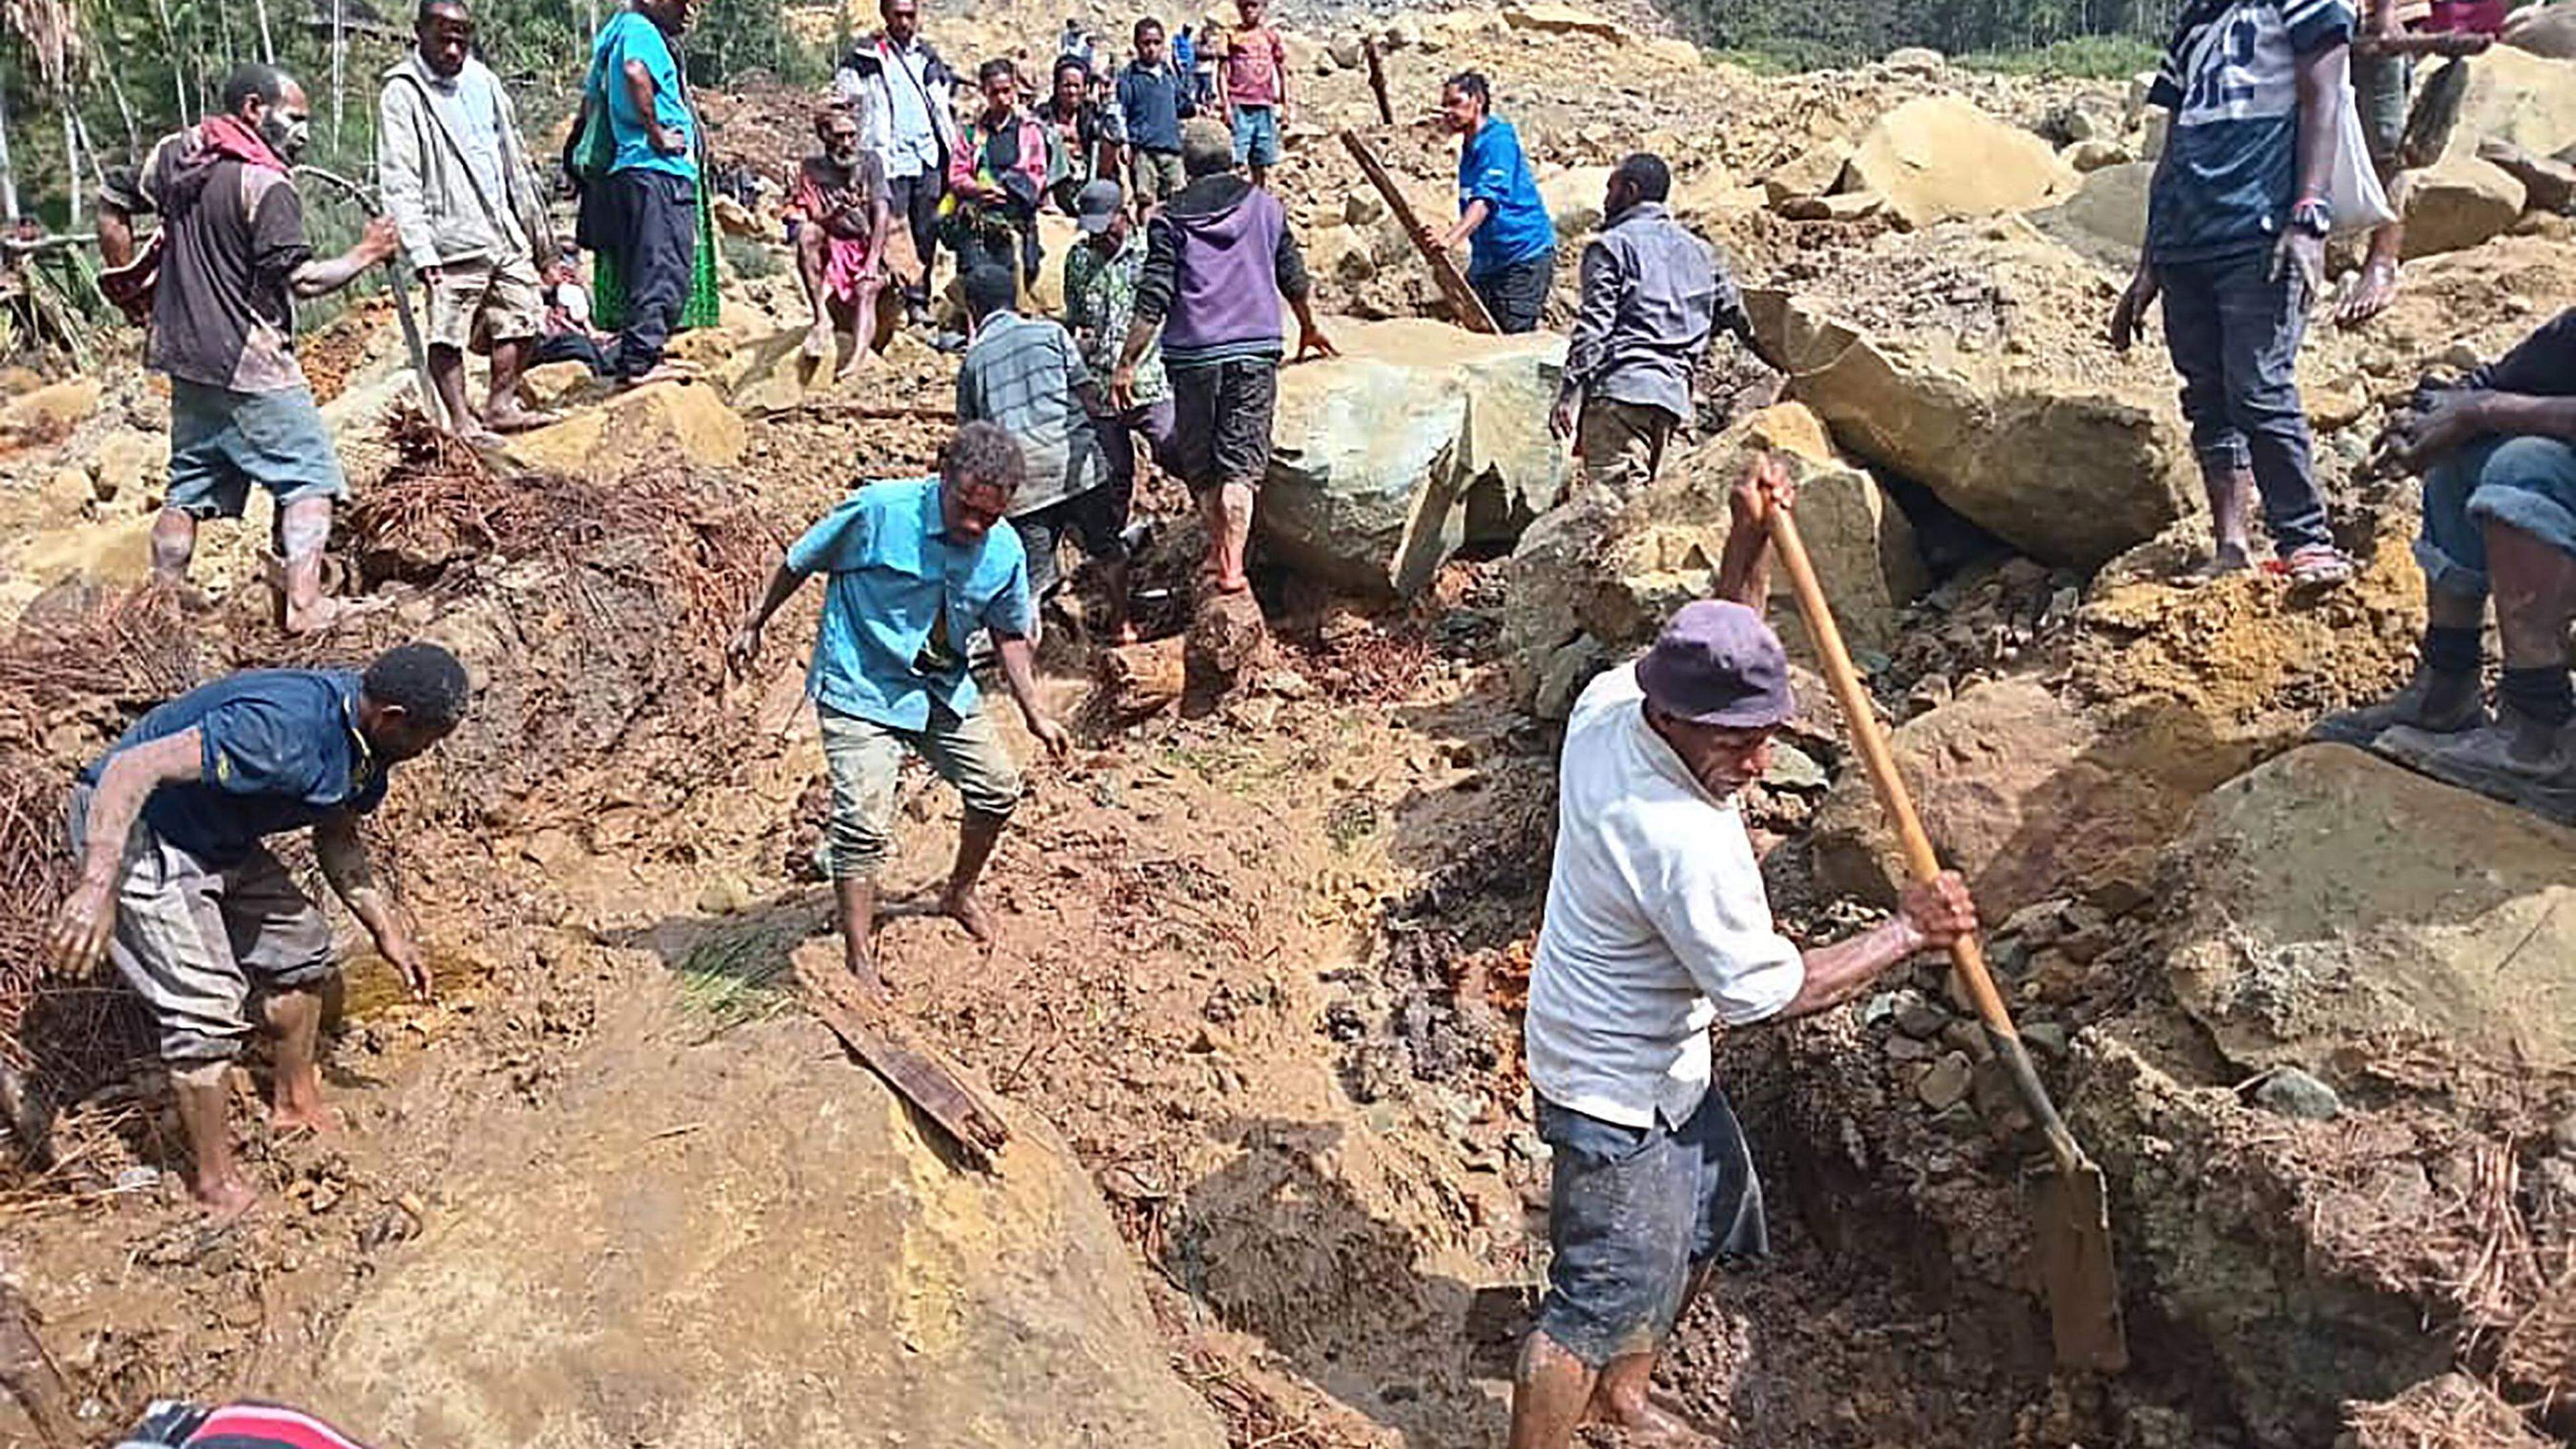 This handout photo taken and received on May 26, 2024 from the International Organization for Migration shows people digging at the site of a landslide at Yambali Village in the region of Maip Mulitaka, in Papua New Guinea's Enga Province. More than 670 people are believed dead after a massive landslide in Papua New Guinea, a UN official told AFP on May 26 as aid workers and villagers braved perilous conditions in their desperate search for survivors. (Photo by Mohamud Omer / International Organization for Migration / AFP) / RESTRICTED TO EDITORIAL USE - MANDATORY CREDIT "AFP PHOTO / INTERNATIONAL ORGANIZATION FOR MIGRATION / MOHAMUD OMER - NO MARKETING NO ADVERTISING CAMPAIGNS - DISTRIBUTED AS A SERVICE TO CLIENTS - NO ARCHIVE